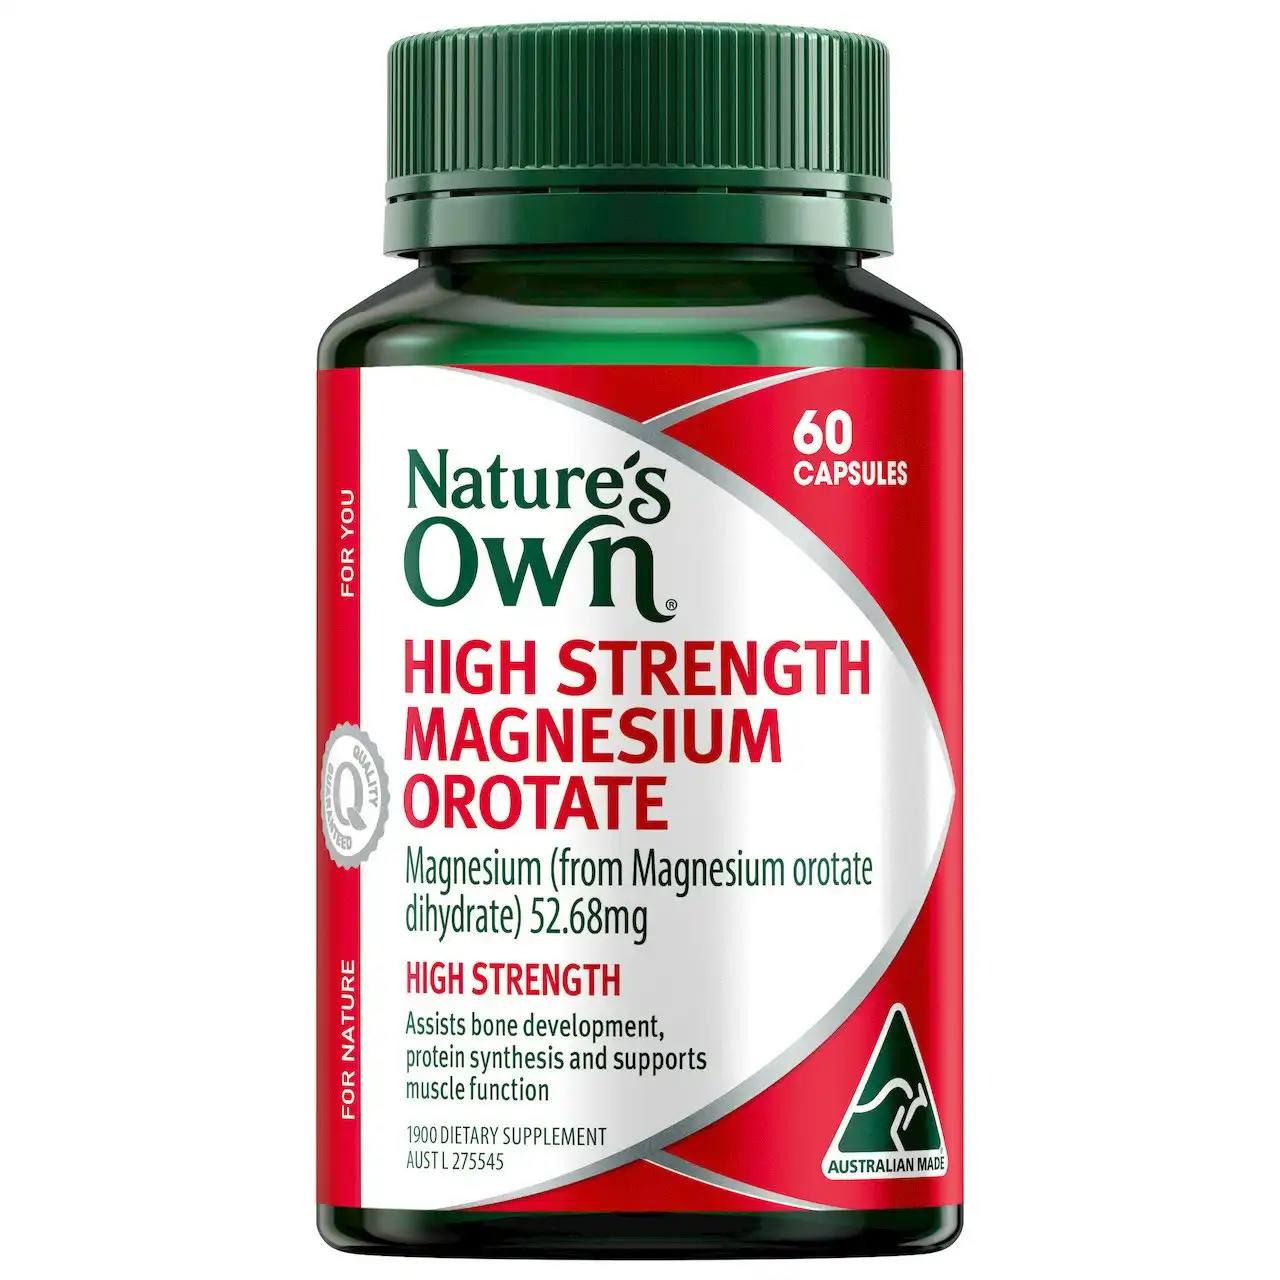 Nature's Own High Strength Magnesium Orotate